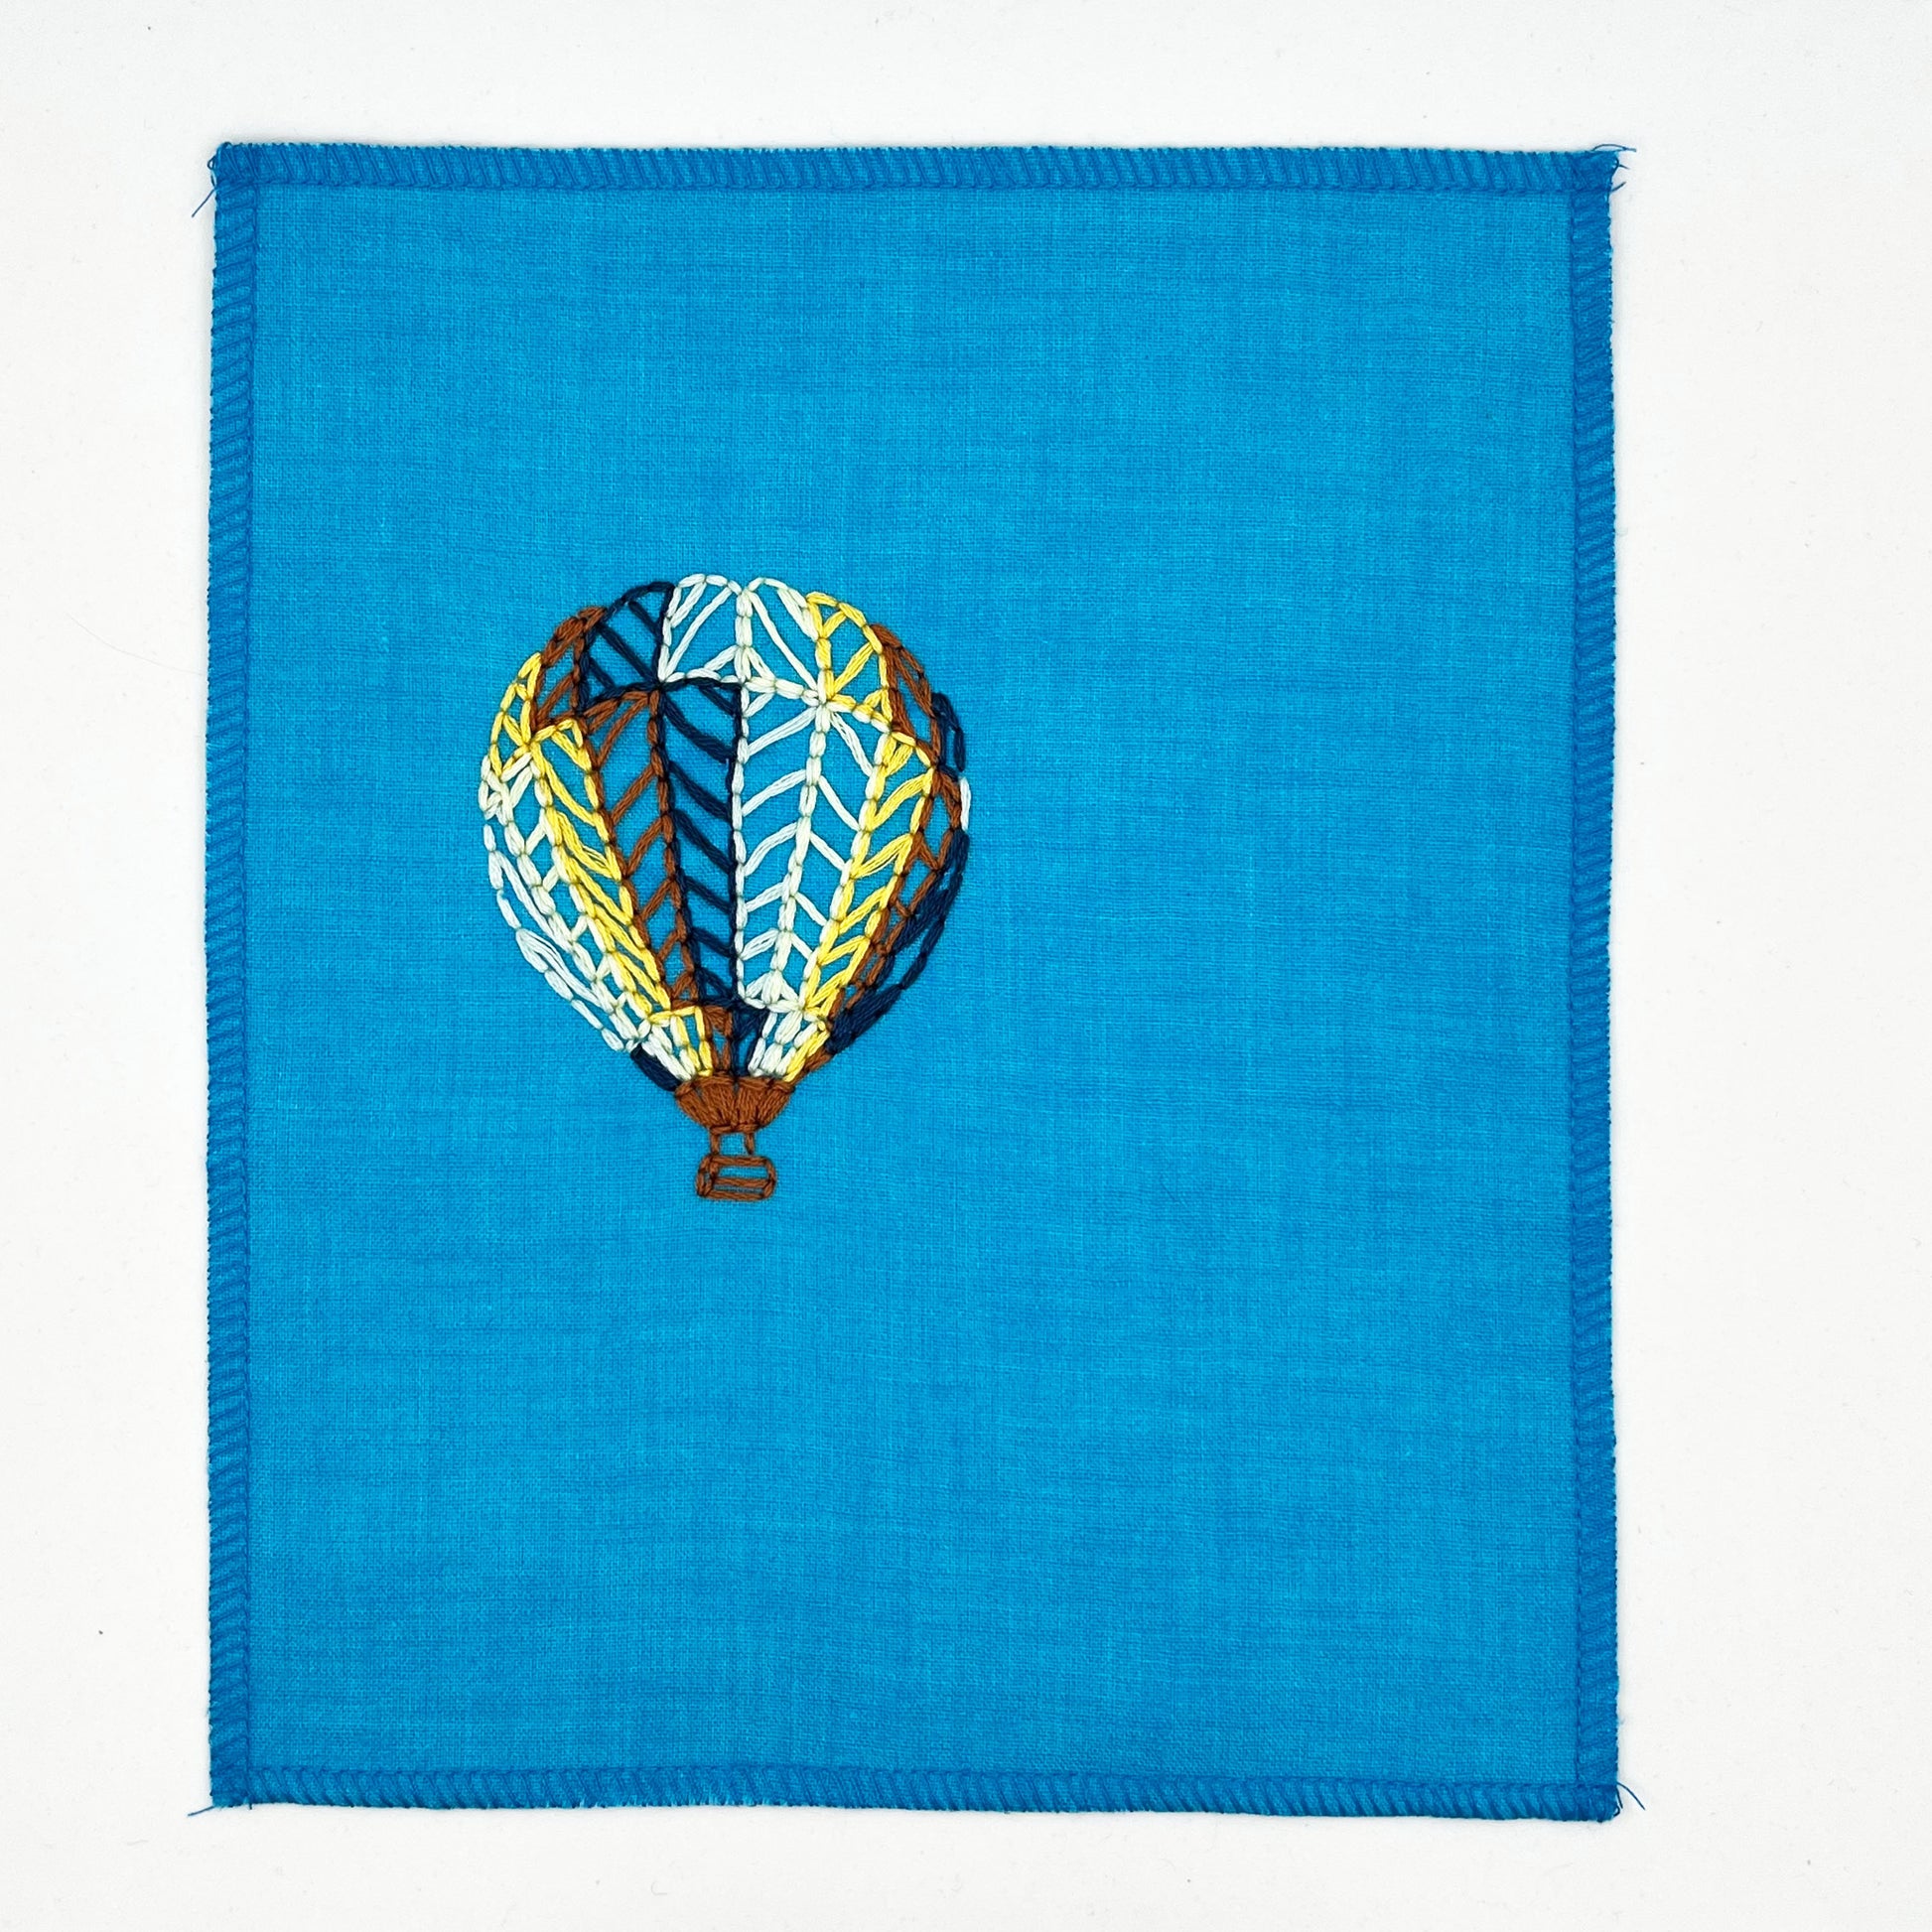 a bright blue fabric wall hanging with a hot air balloon stitched on it off center, in dark blue, light blue, light green, yellow and rust colored thread, on a white background